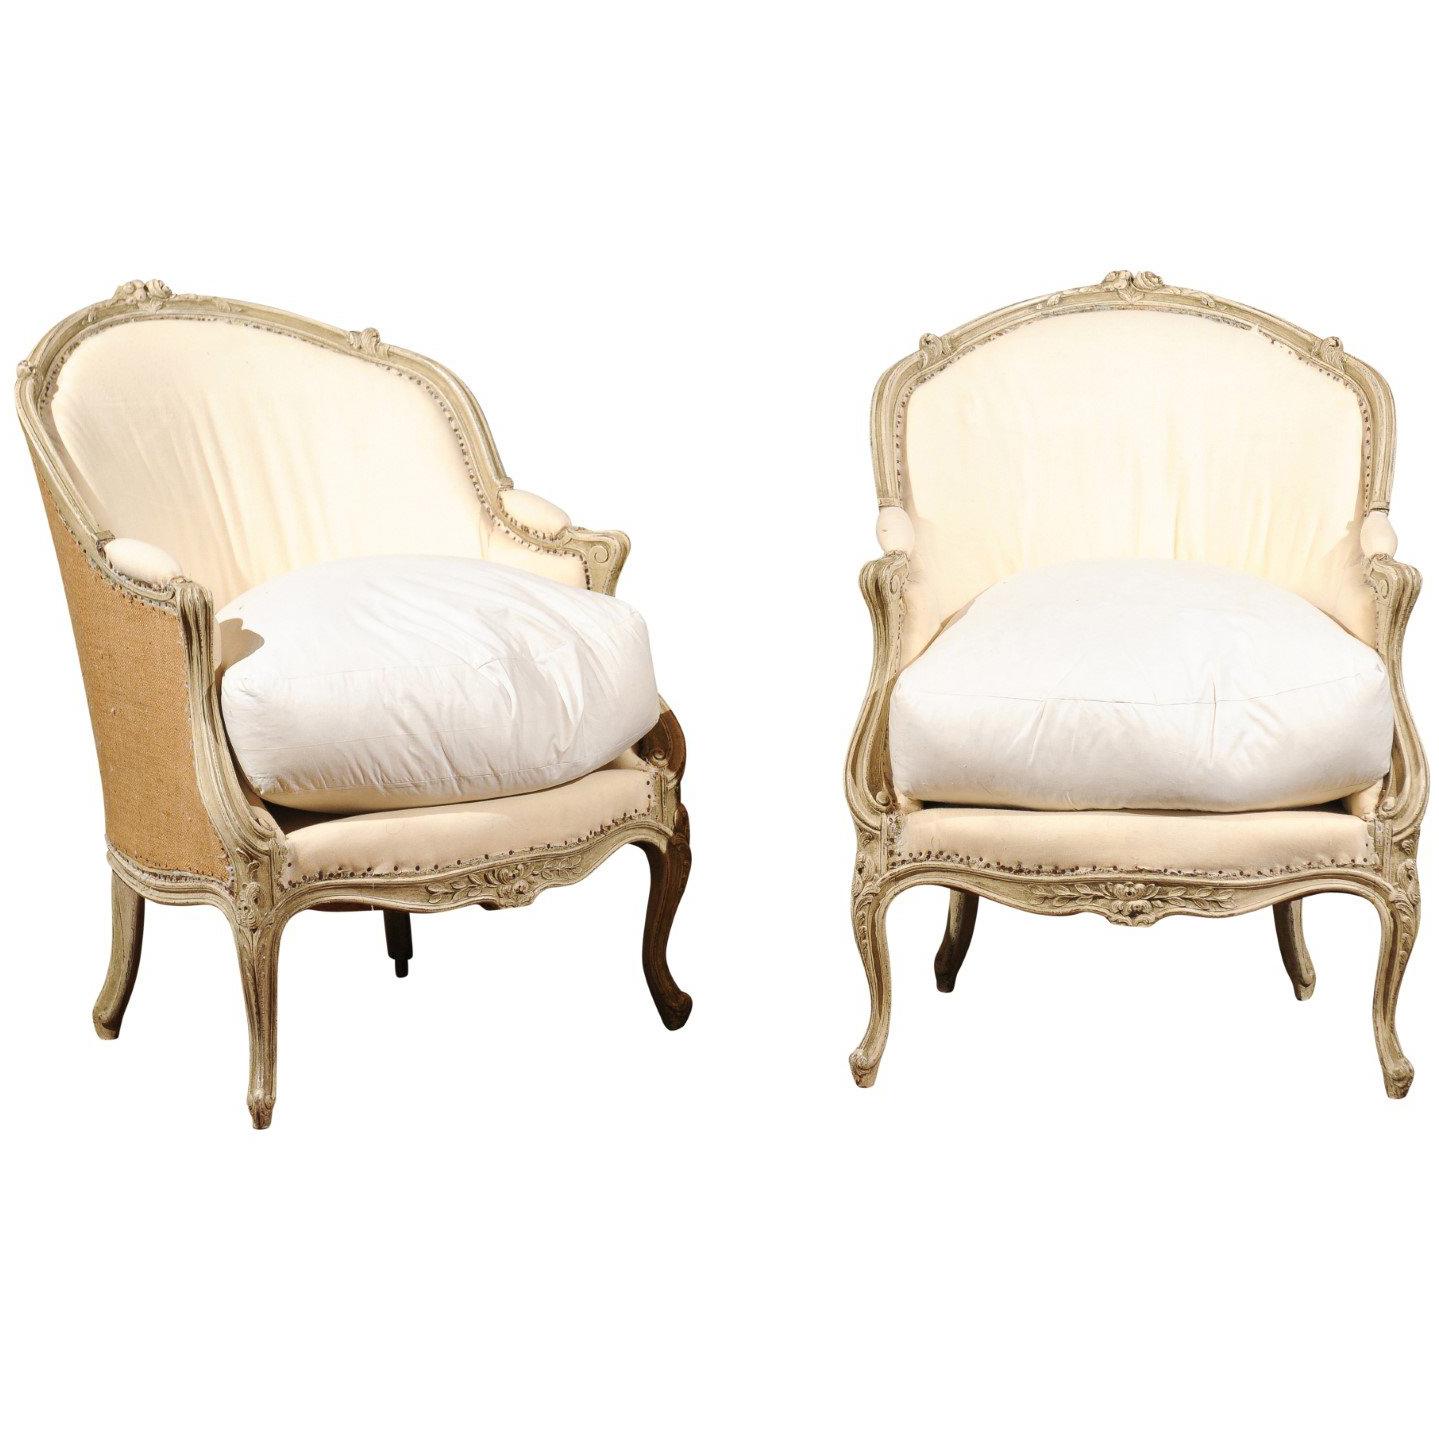 Pair of 18th Century French Louis XV Painted Bergère Chairs with Wraparound Back